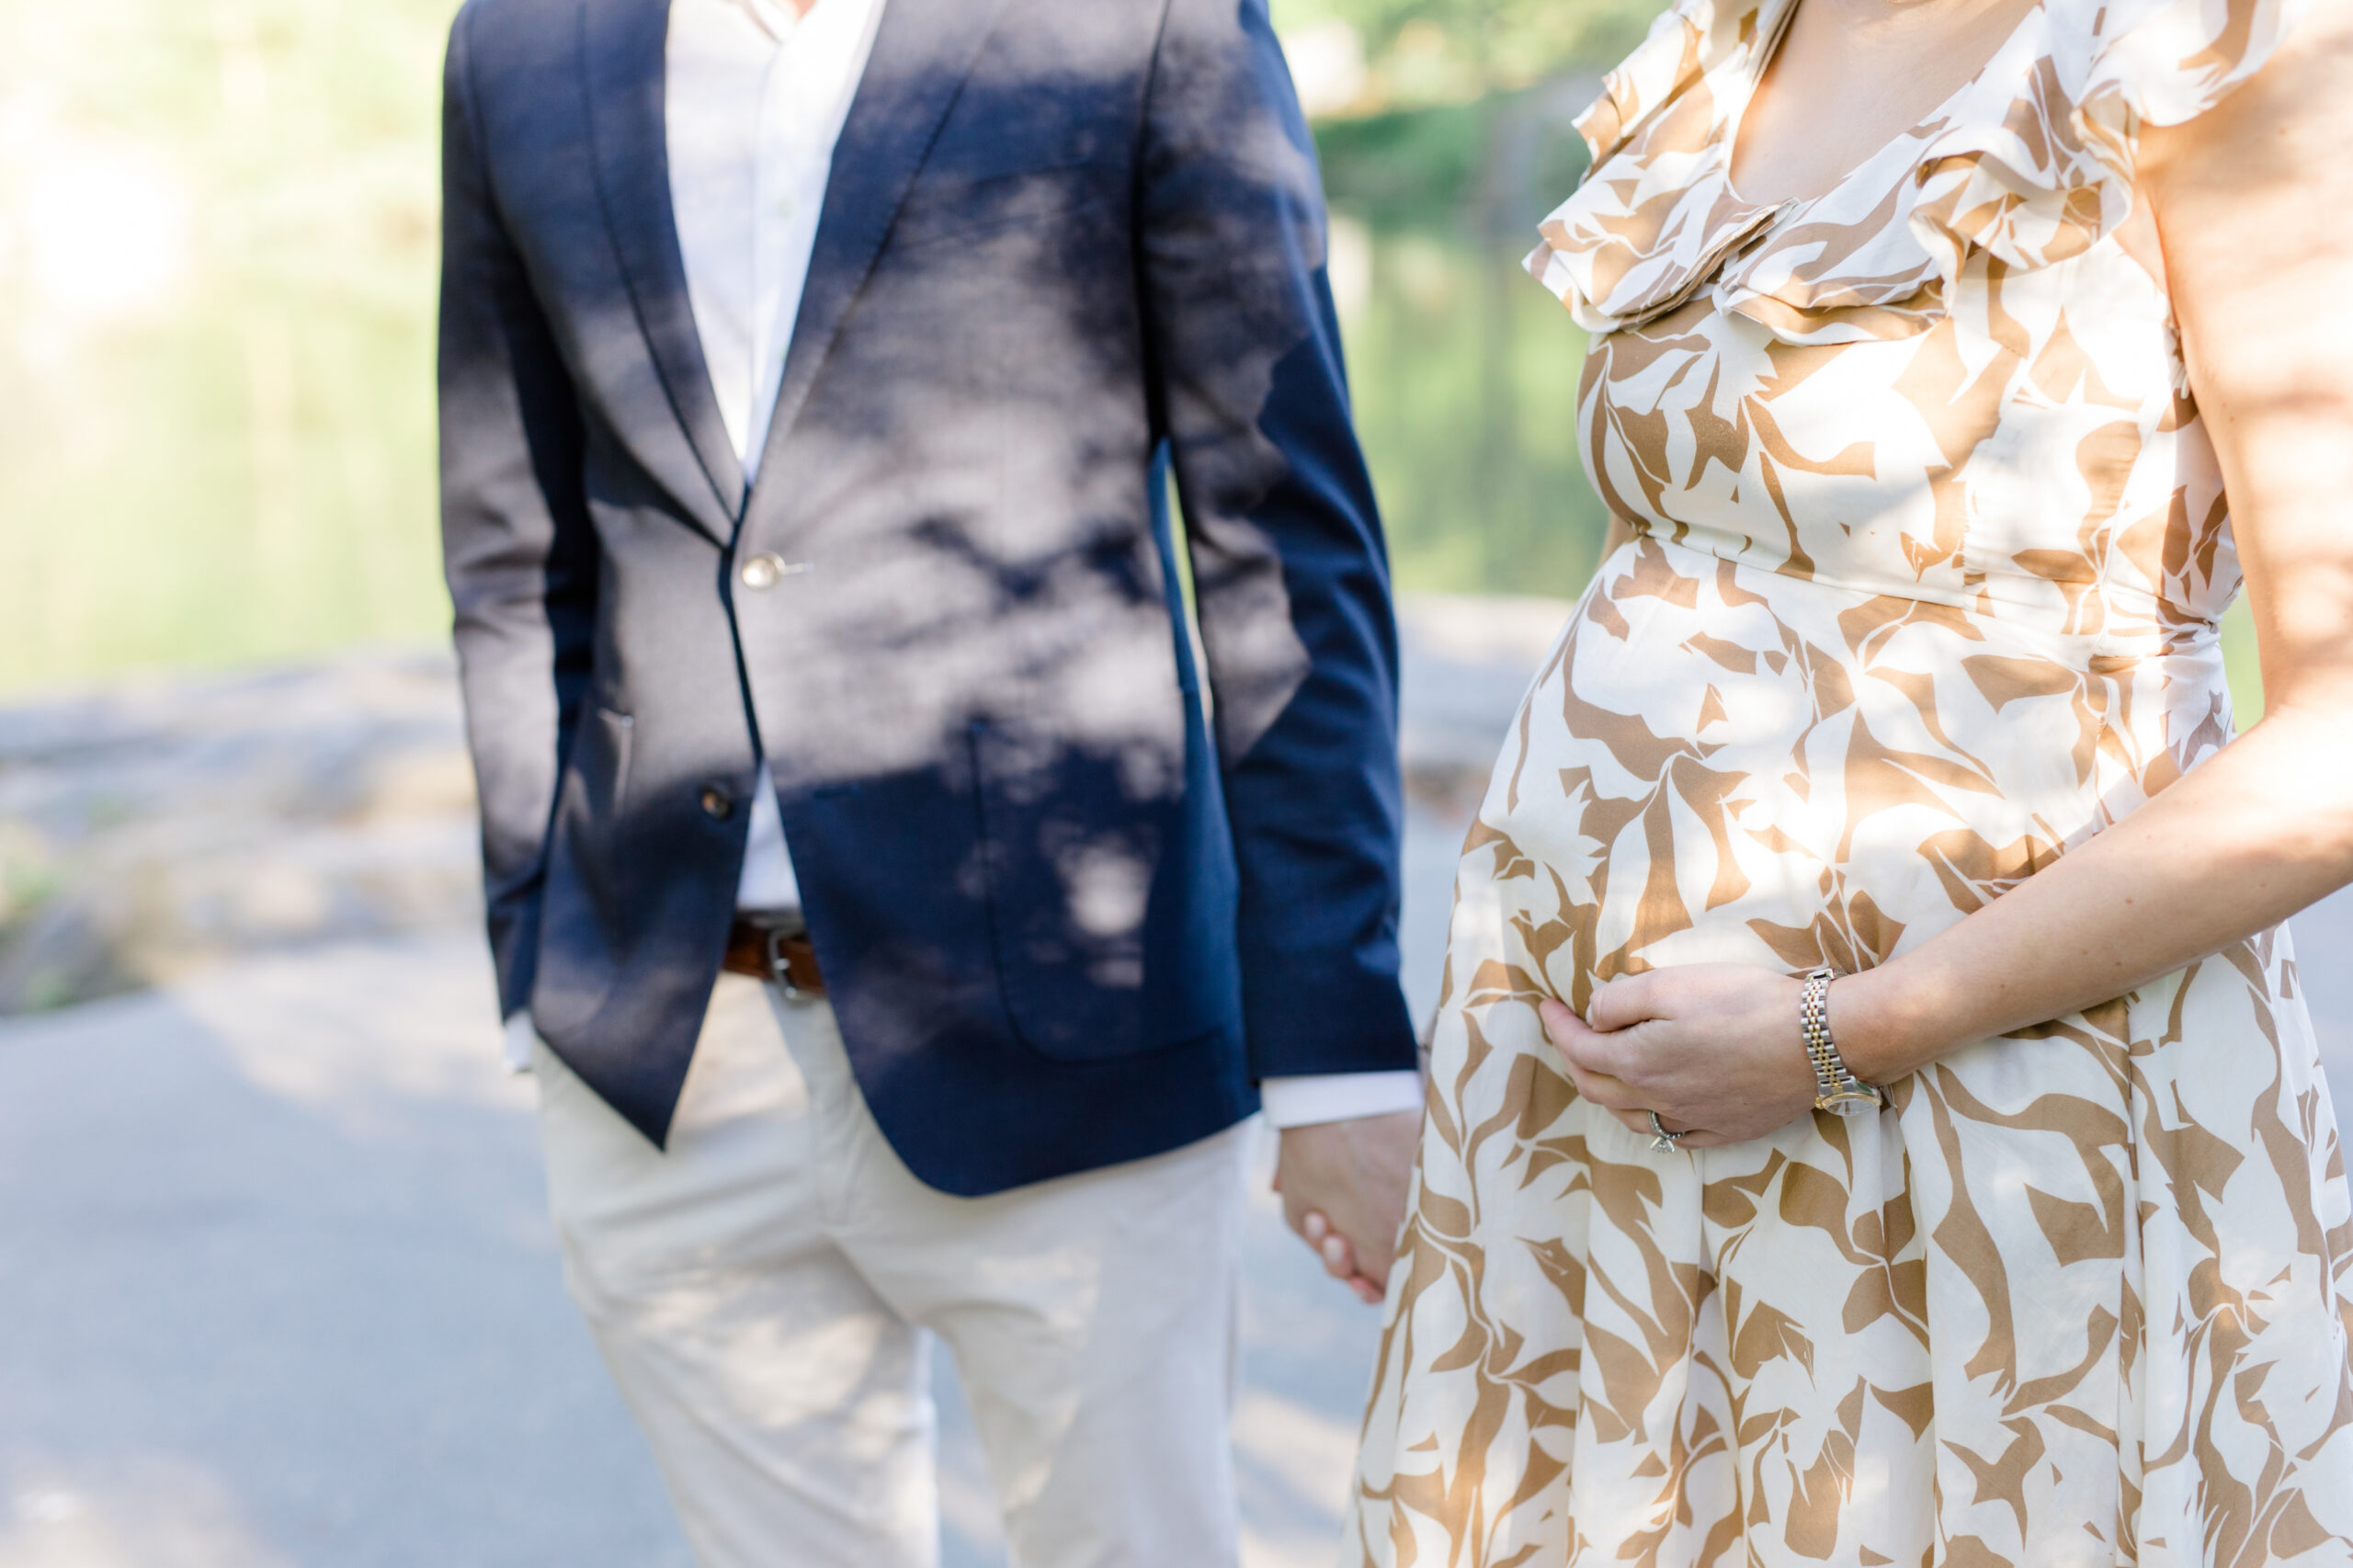 A pregnant woman and her husband at a maternity photo session in Central Park shot by Jacqueline Clair Photography